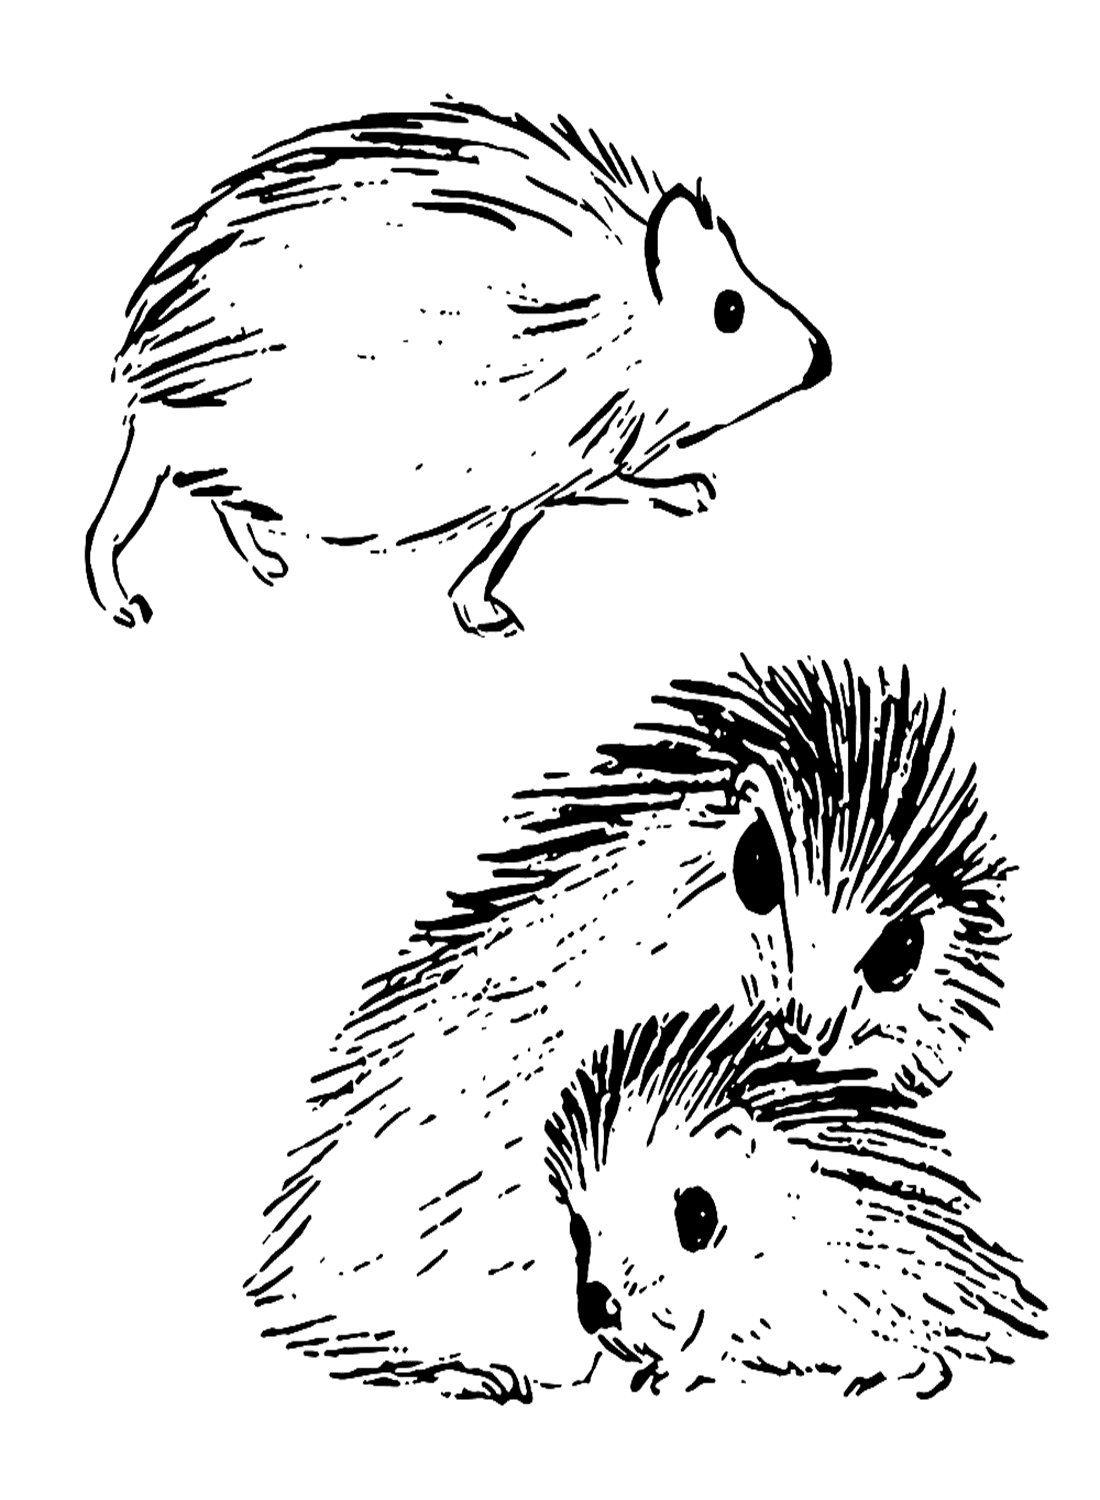 Porcupines Coloring Page To Download from Porcupine